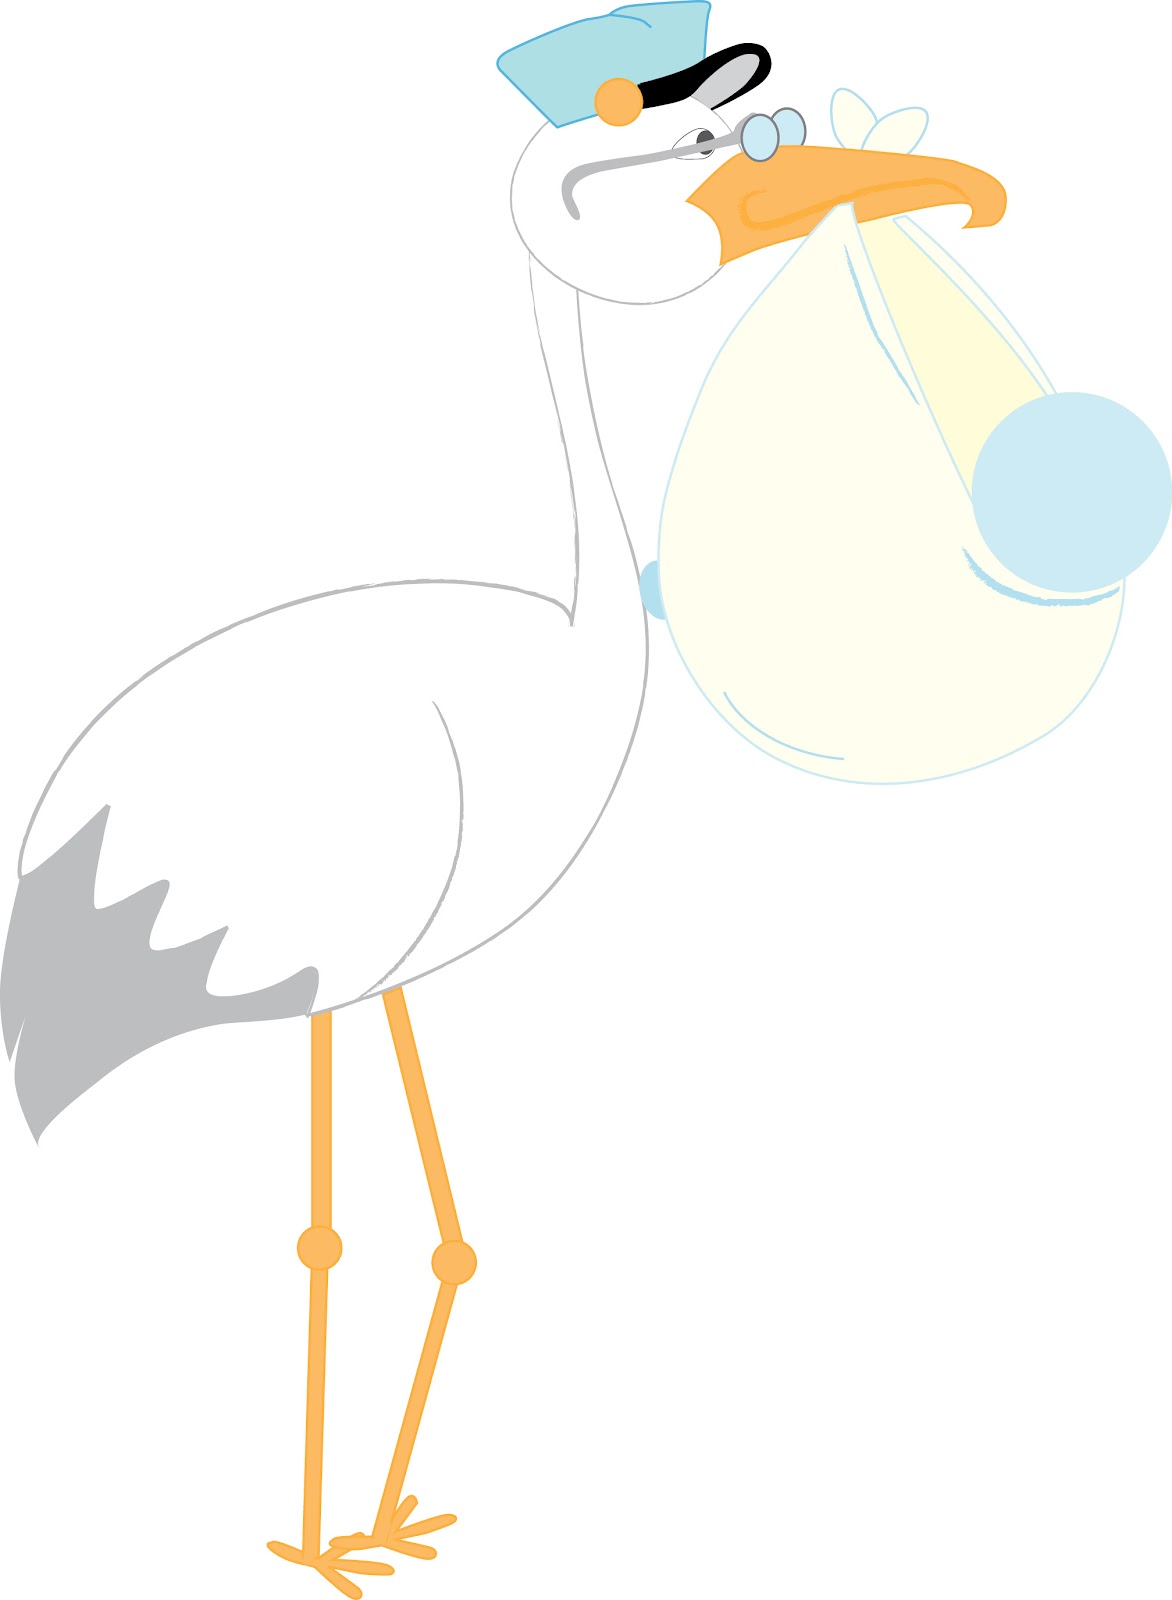 Stork And Baby Images - ClipArt Best